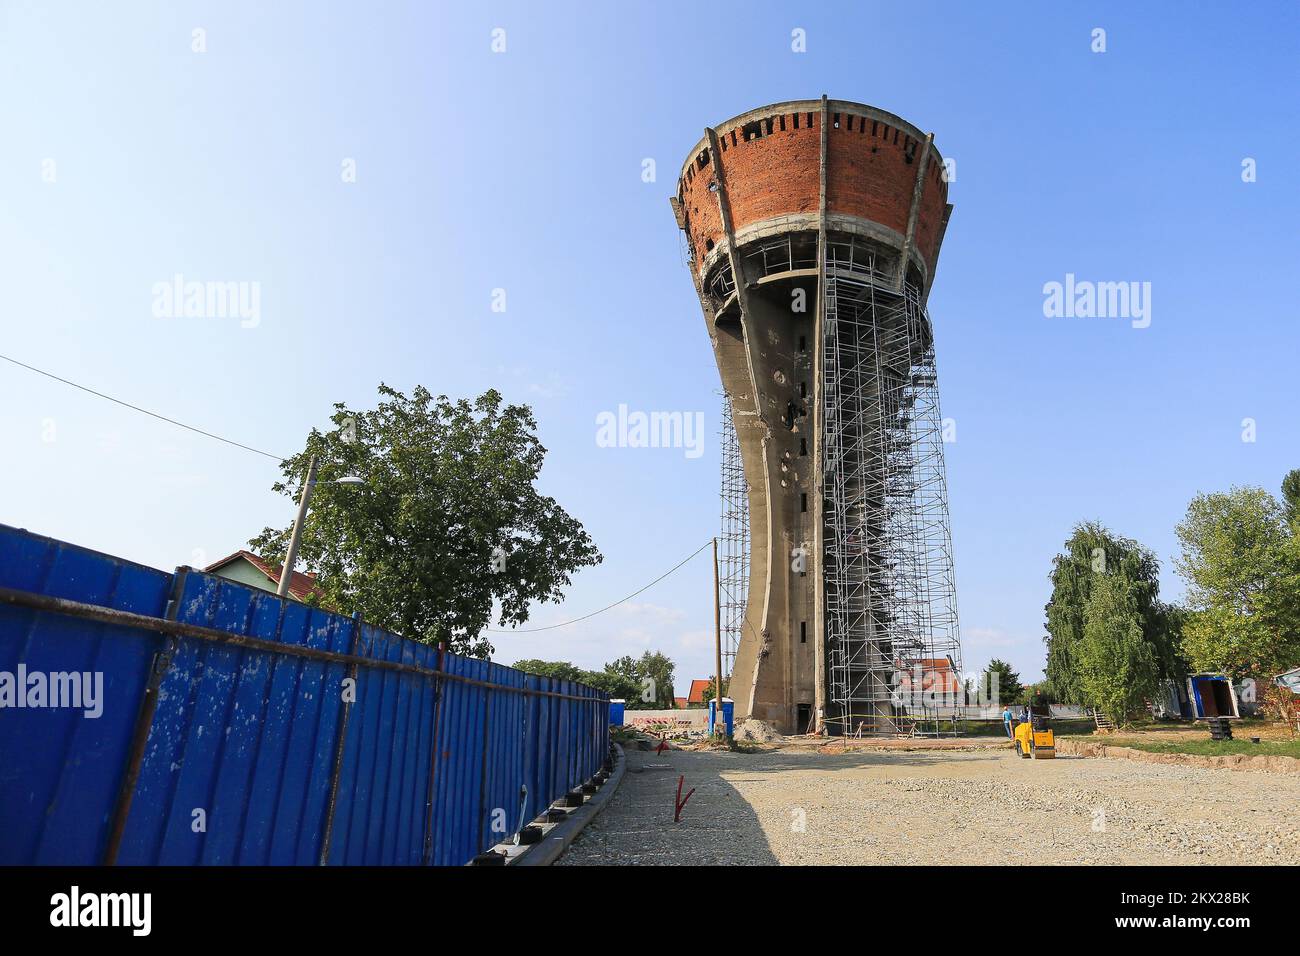 23.08.2017., Vukovar, Croatia - Reconstruction of Vukovar Water Tower which is one of symbols of resistance during the Homeland war. Photo: Davor Javorovic/PIXSELL Stock Photo